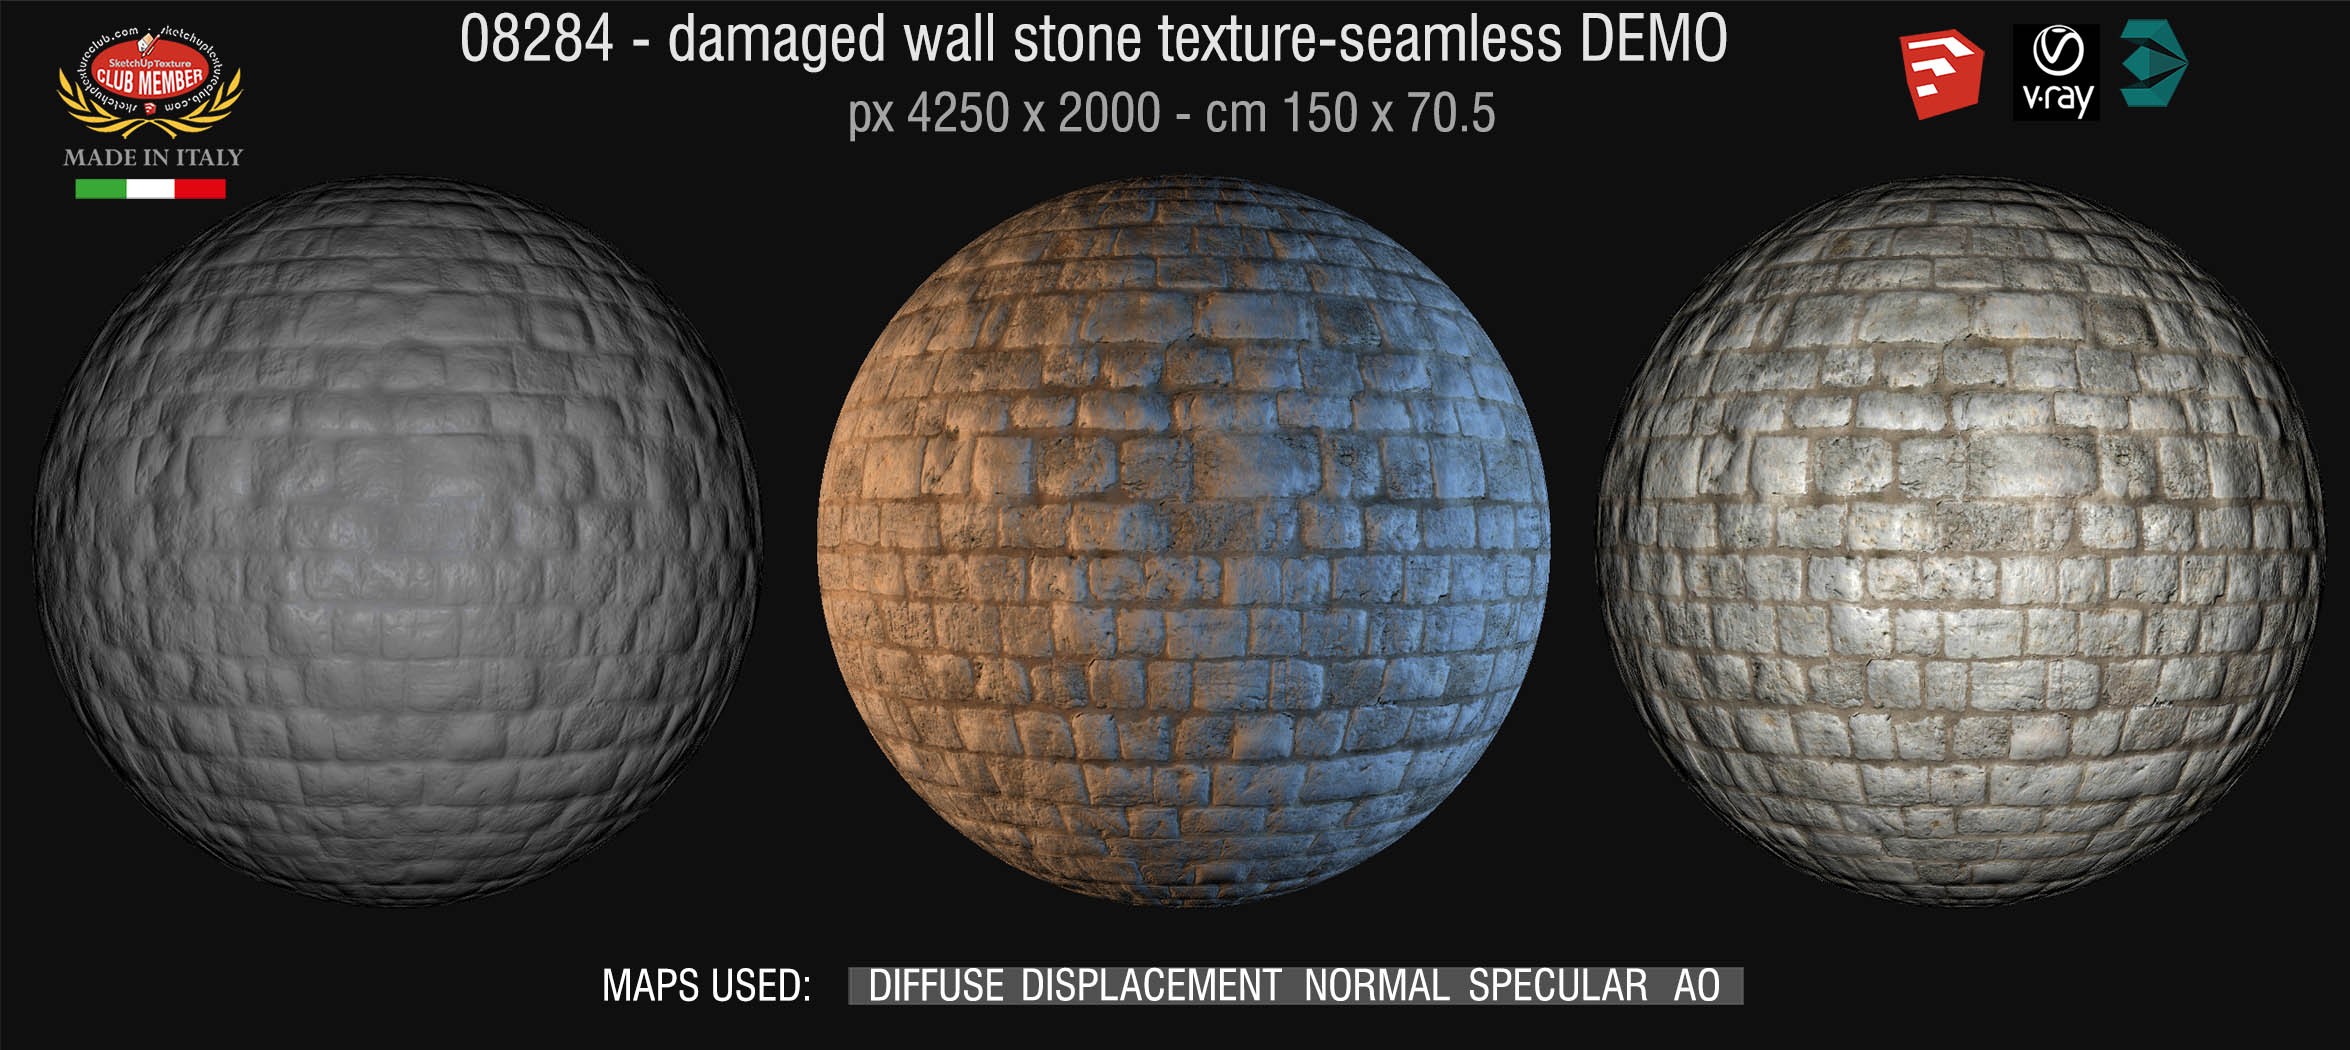 08284 HR Damaged wall stone texture + maps DEMO